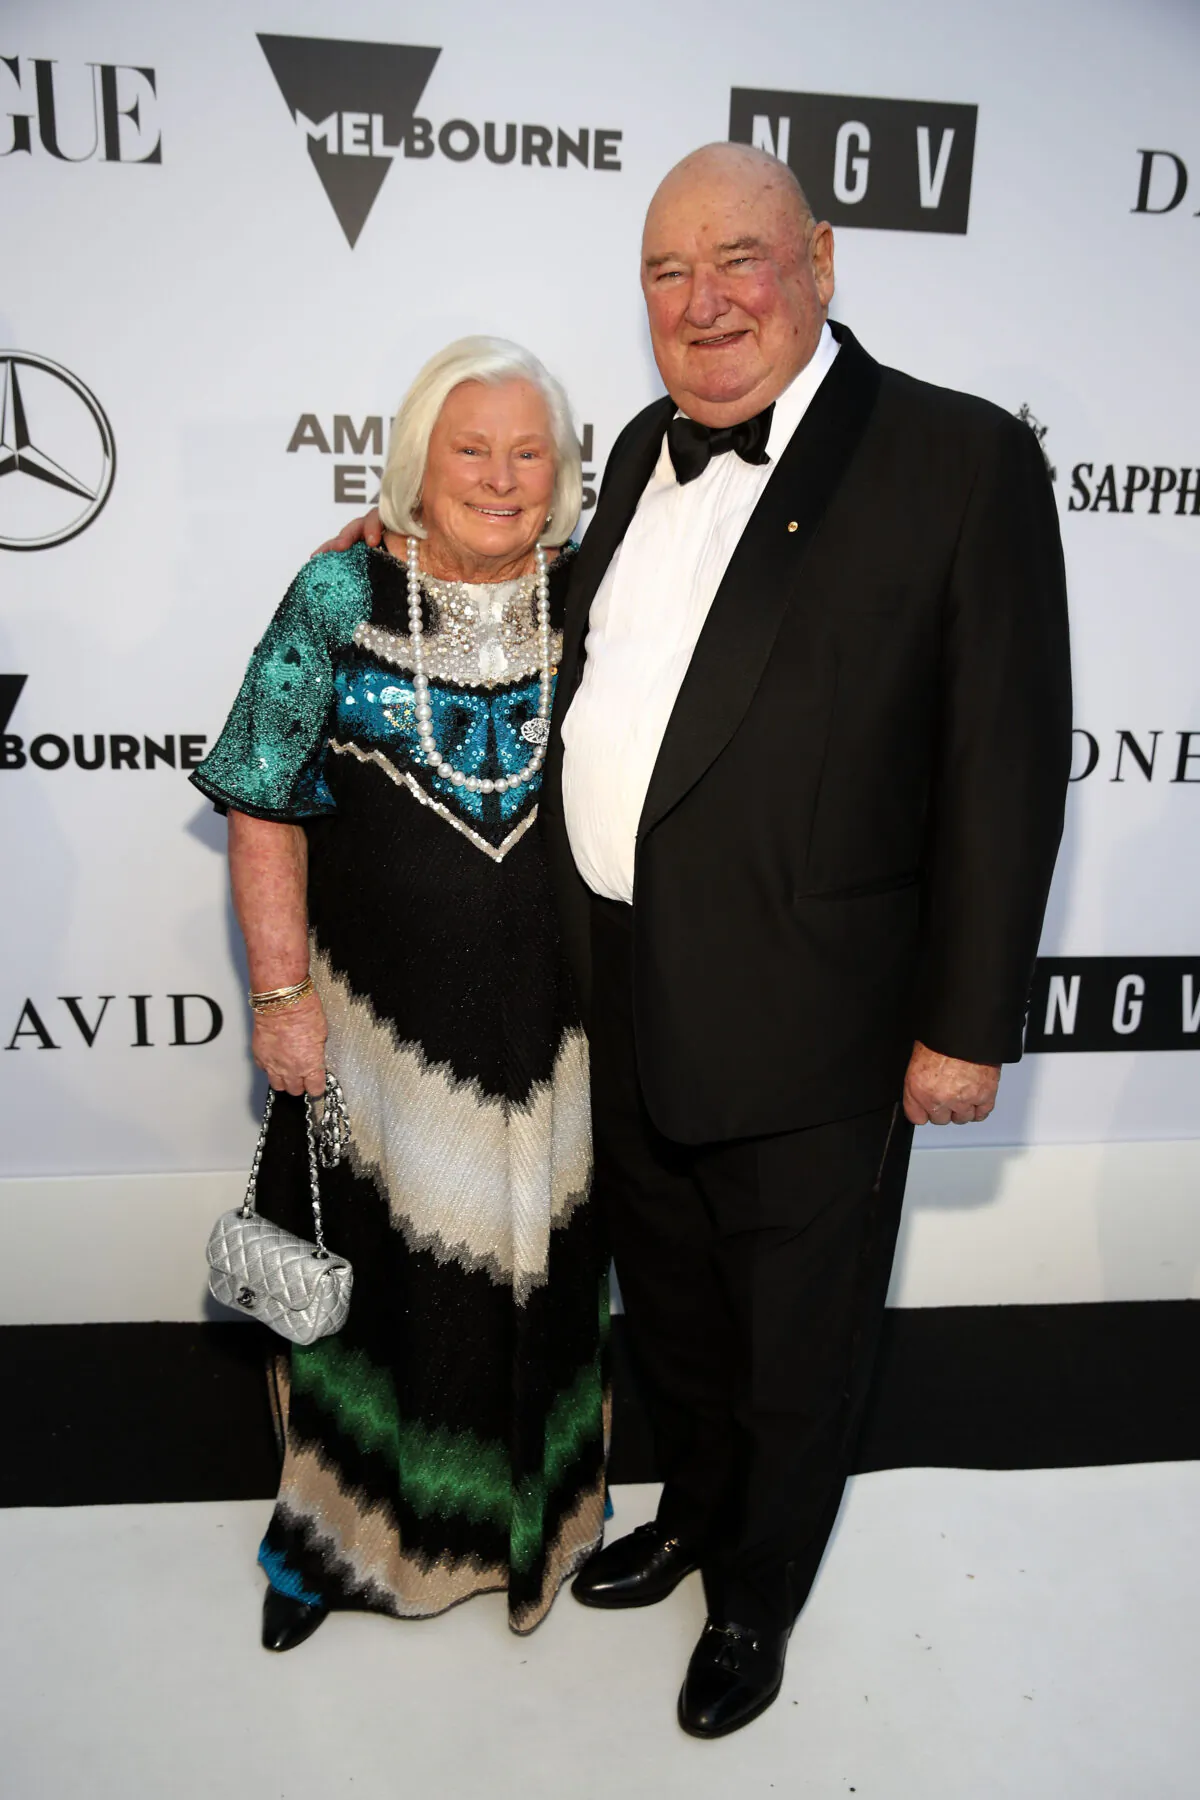 Lindsay Fox and his wife Paula Peele at the National Gallery of Victoria, in Melbourne, Australia on December 1, 2018. (Ryan Pierse/Getty Images)